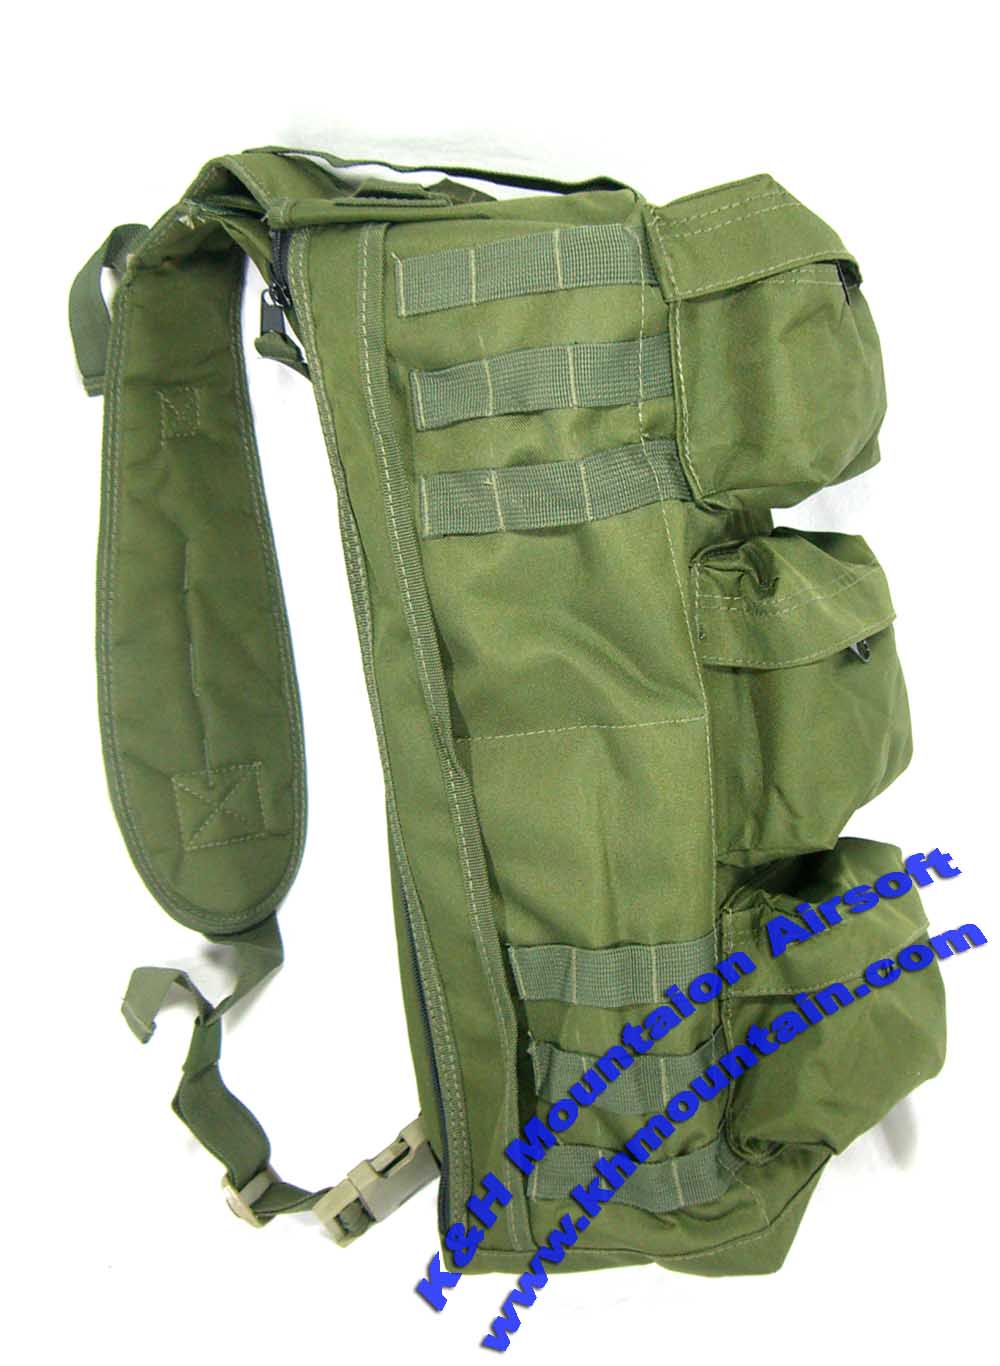 Transformers Go Bag Hydration Pack in Green color